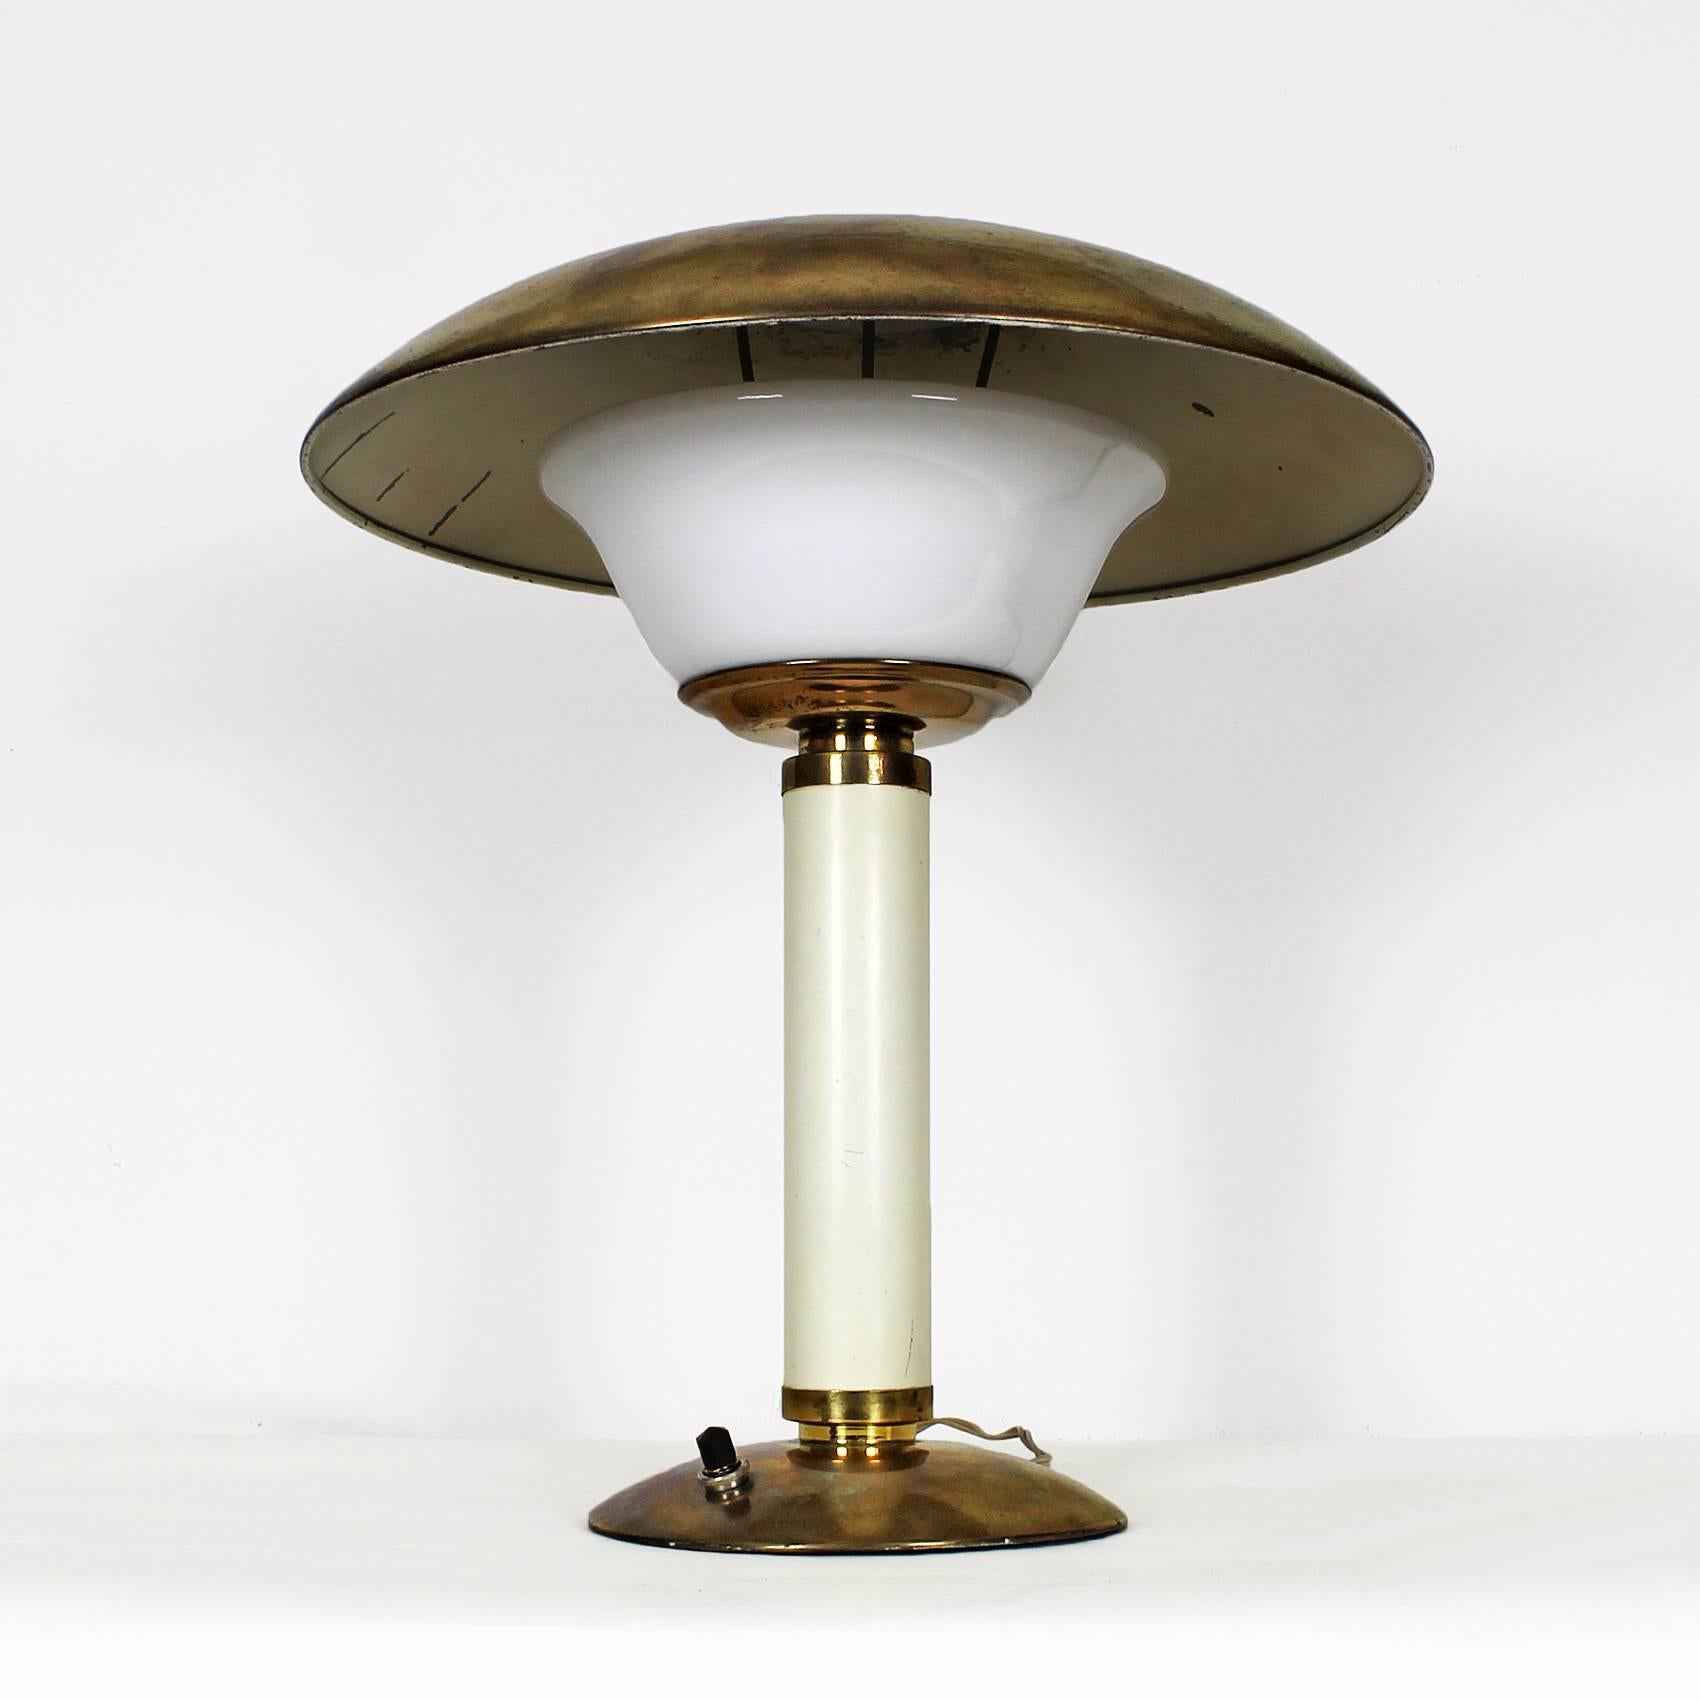 Nice Art Deco table lamp, ivory lacquered wood stand, lampshade, base and central piece in polished brass, perspex reflector, Bakelite switch.

Model 350 Grand Luxe
Maker: JUMO

France, 1930-1940.